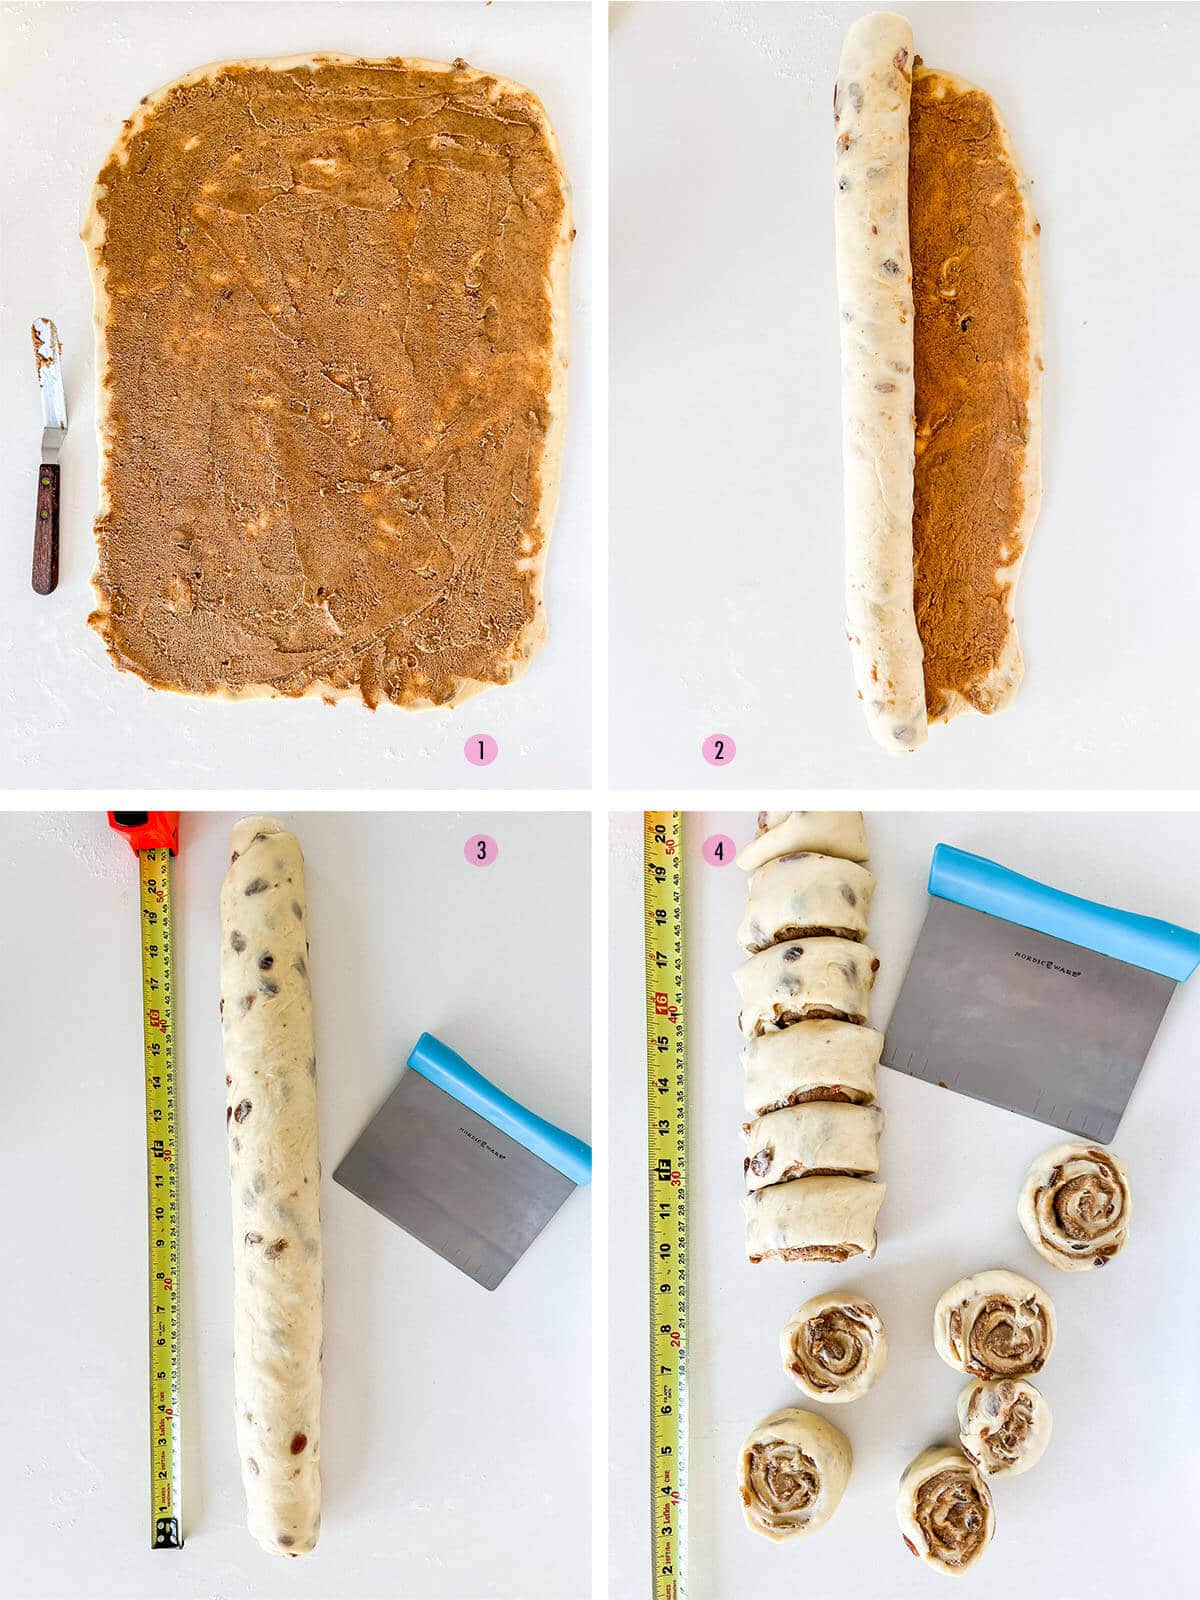 A collage of four images to show the key steps to shaping cinnamon rolls from spreading the cinnamon sugar filling on the rolled dough in the first image, rolling the dough into a log in the second image, using a measuring tape to divide the dough into 12 equal rolls in the third image, and using a pastry cutter to cut the rolls of dough in the fourth image.